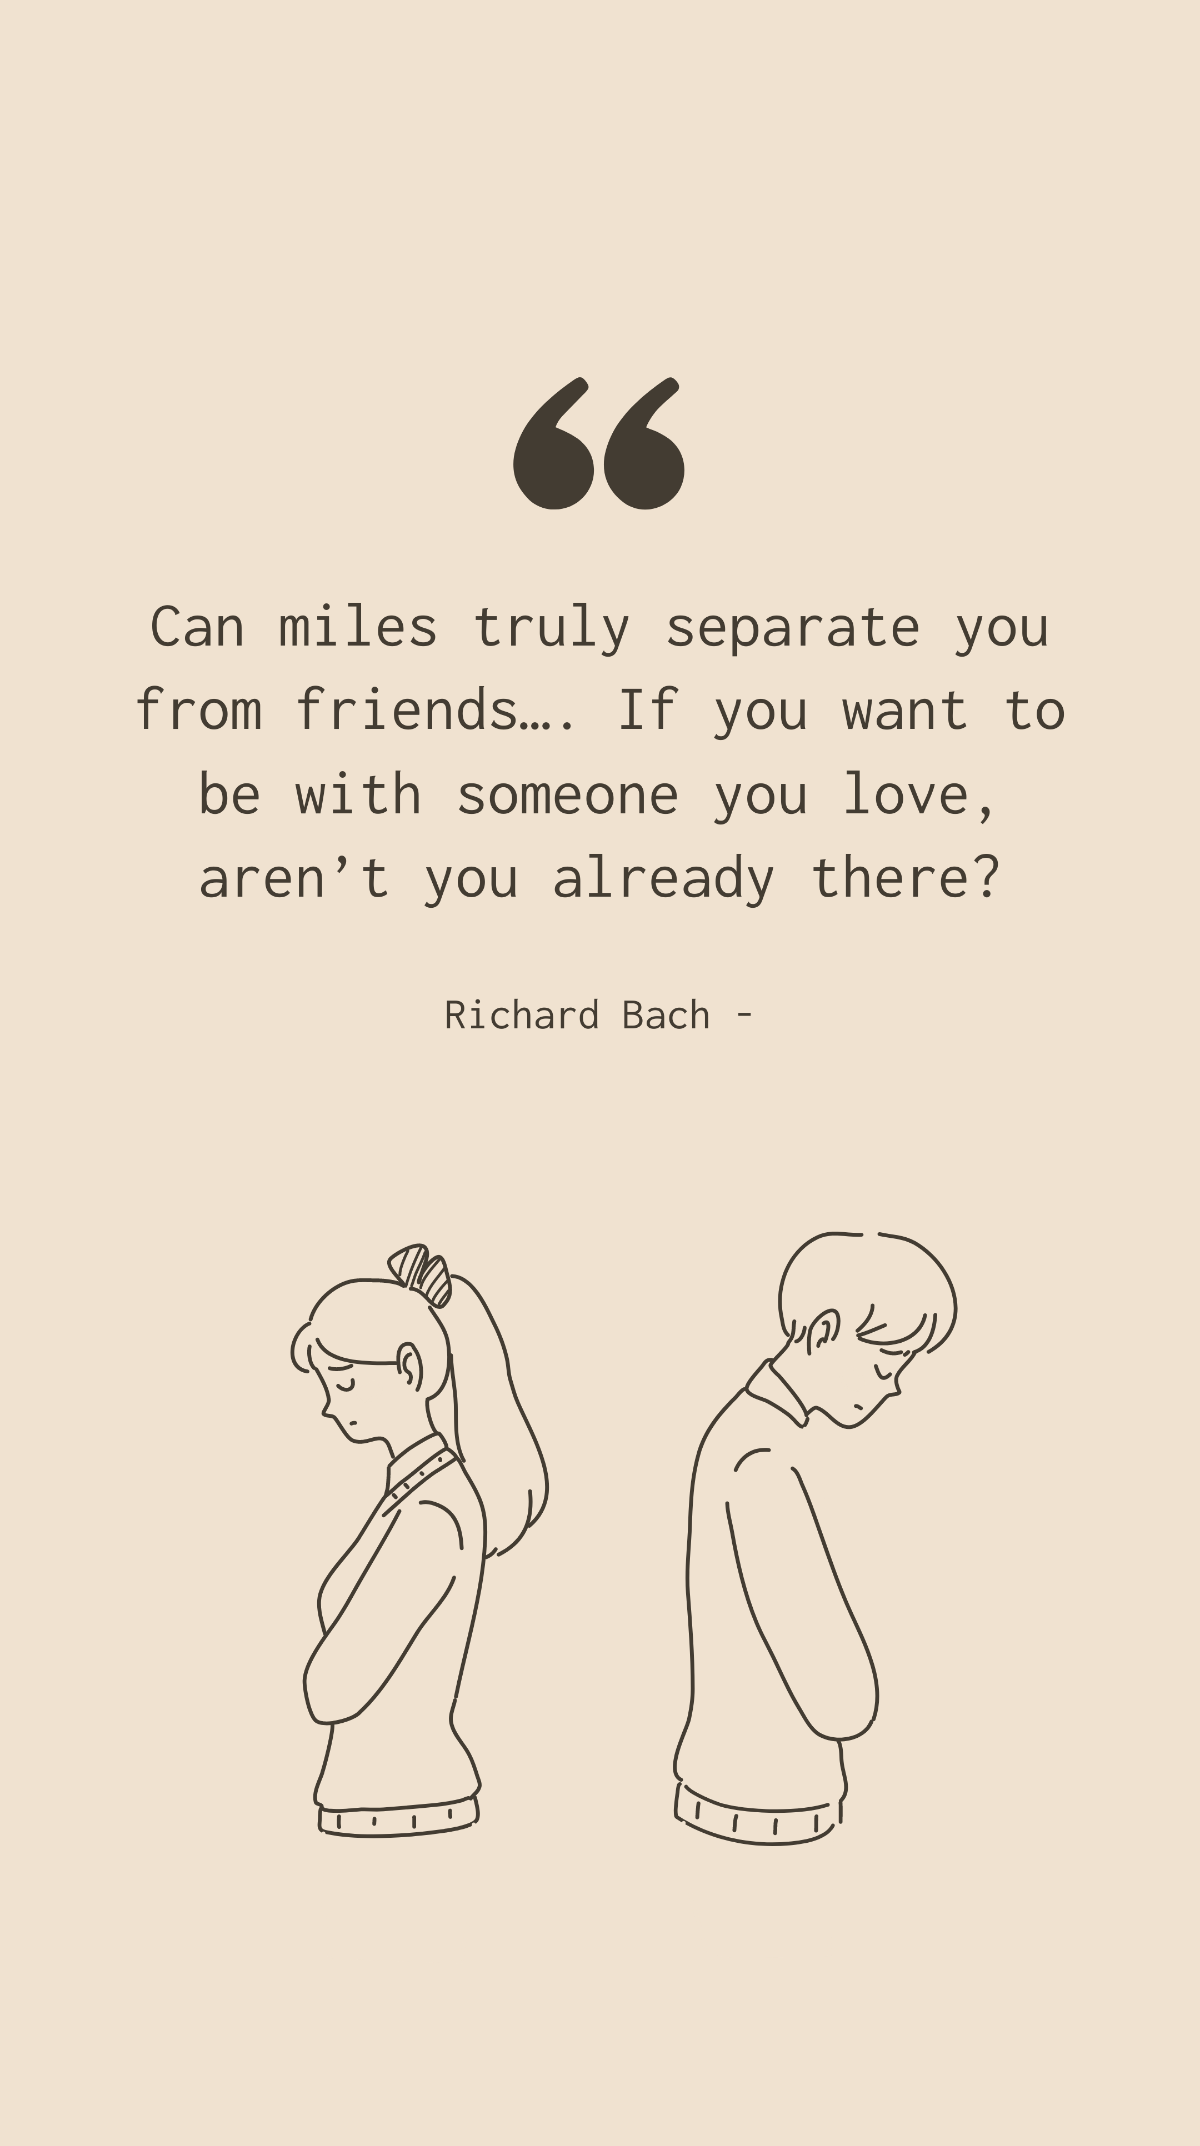 Richard Bach - Can miles truly separate you from friends…. If you want to be with someone you love, aren’t you already there? Template